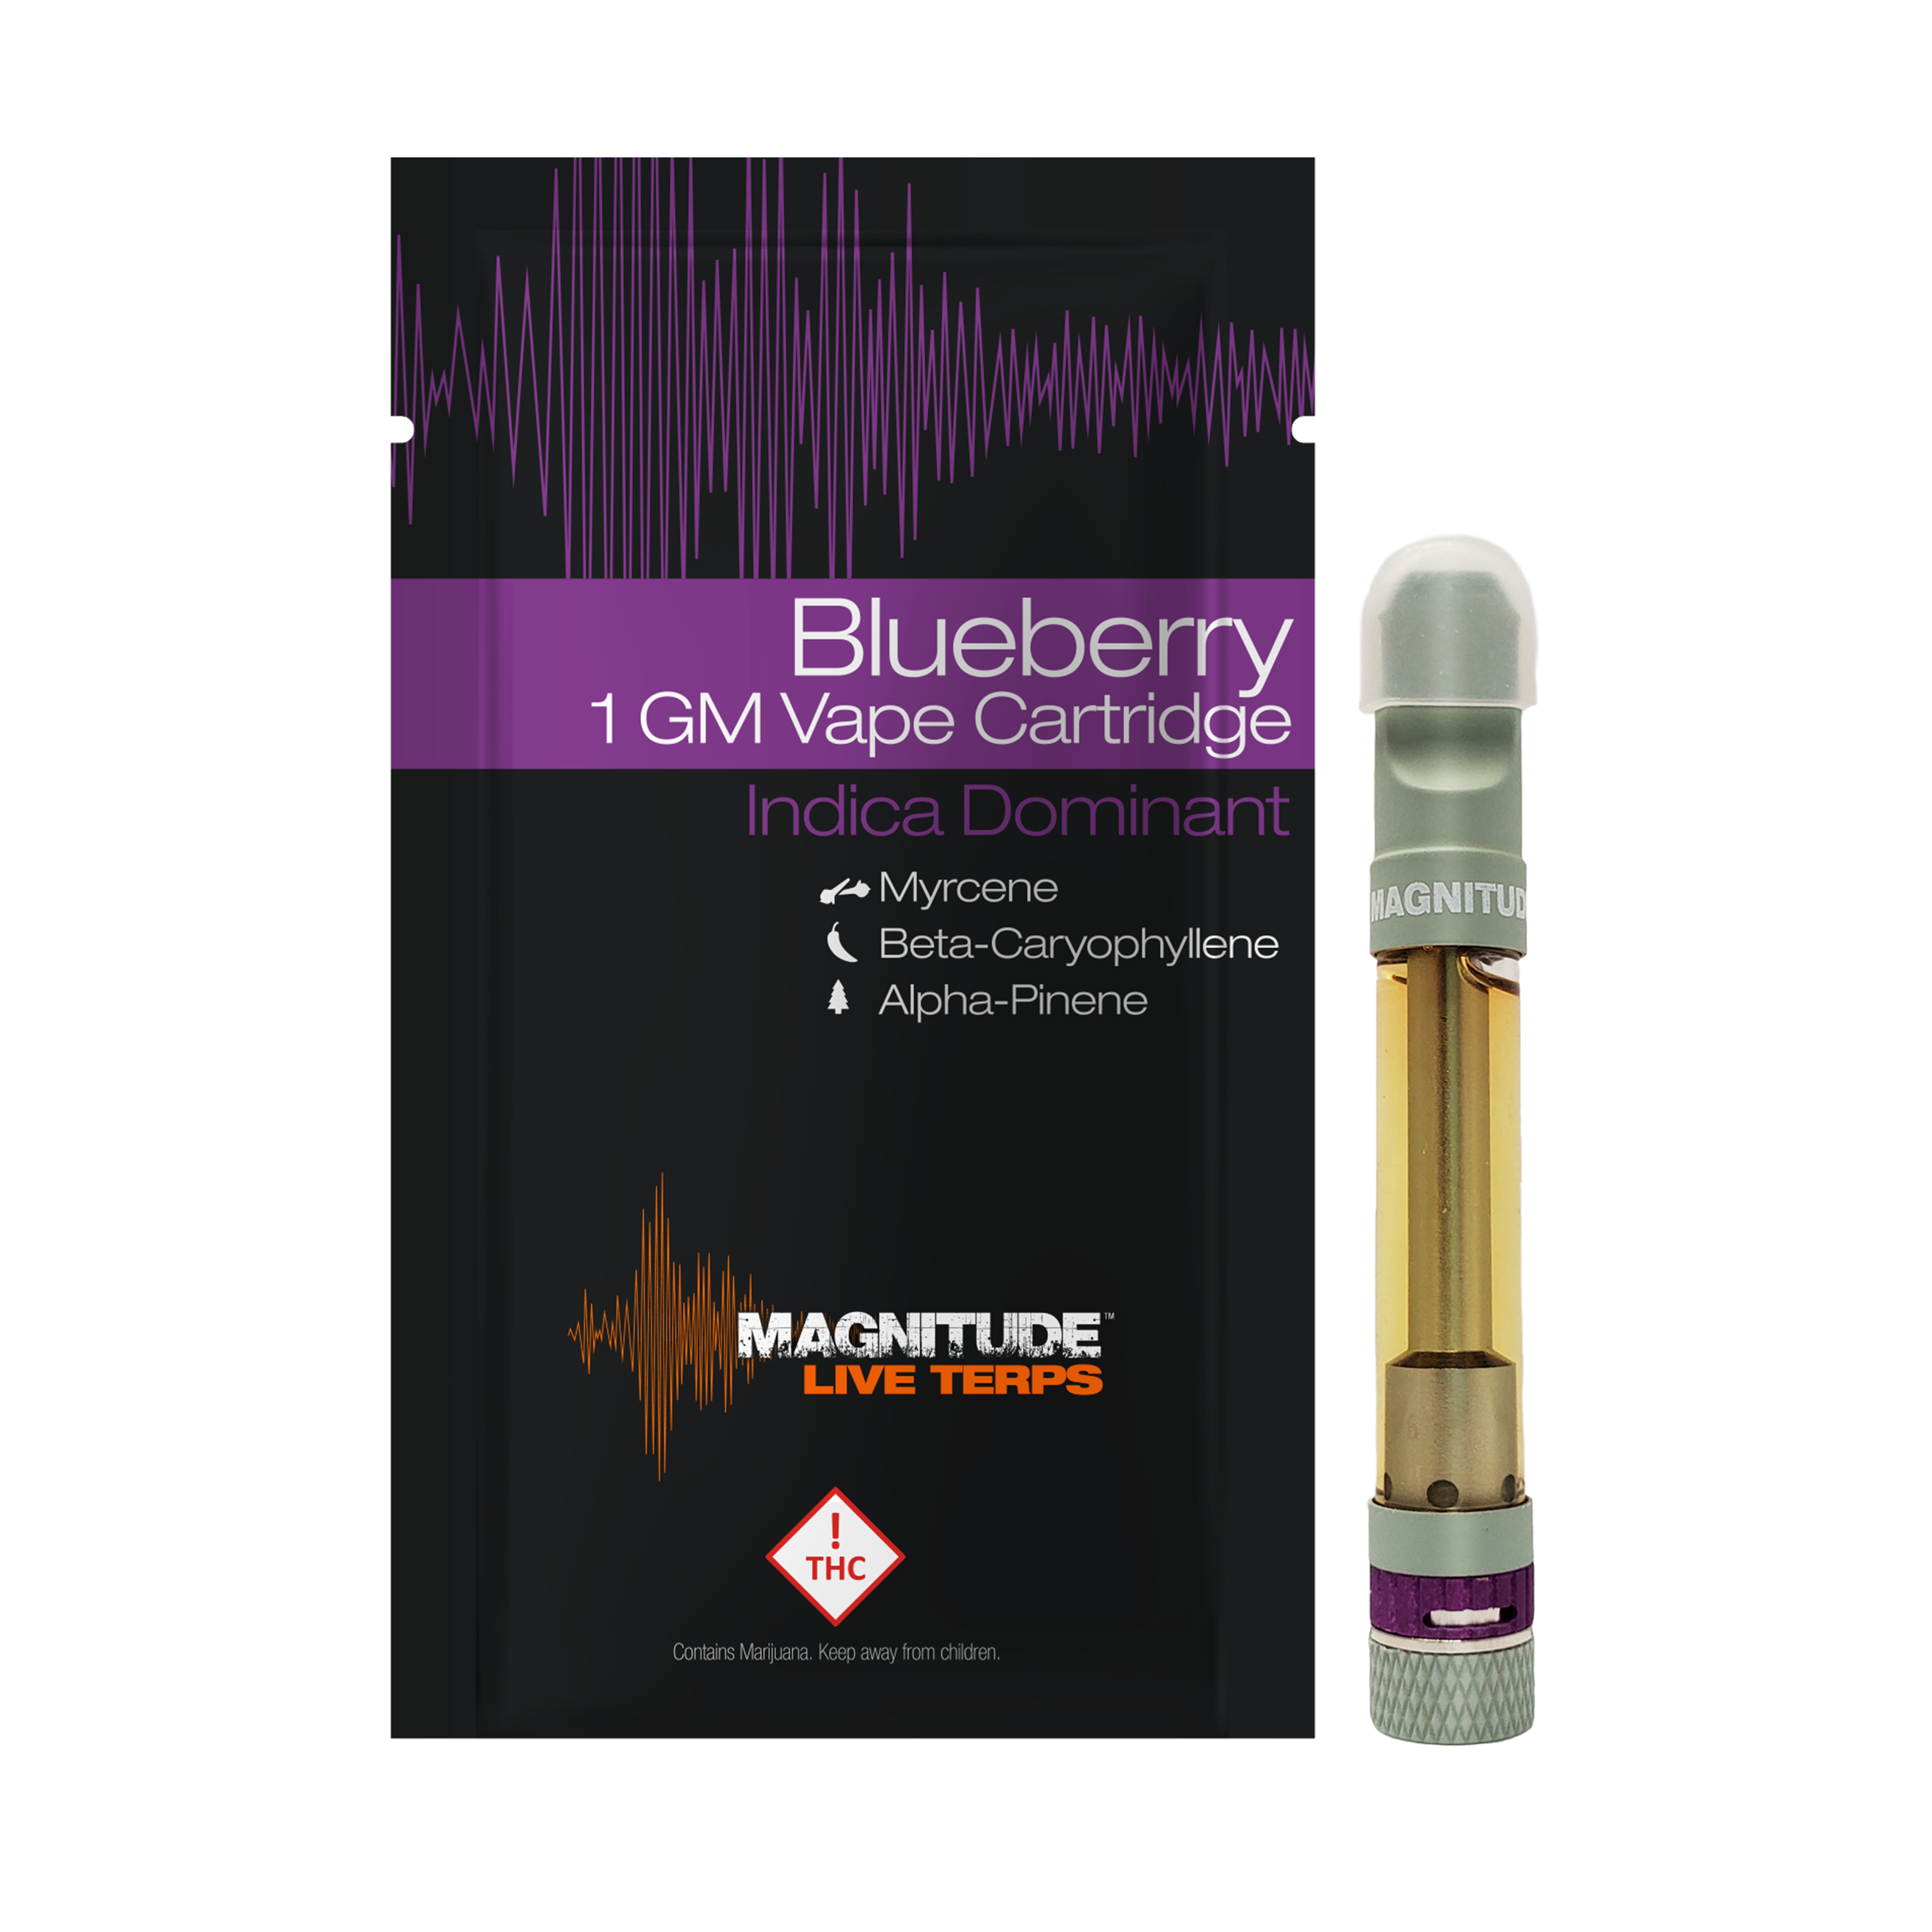 Magnitude Indica Blueberry Live Terp Cart 1g